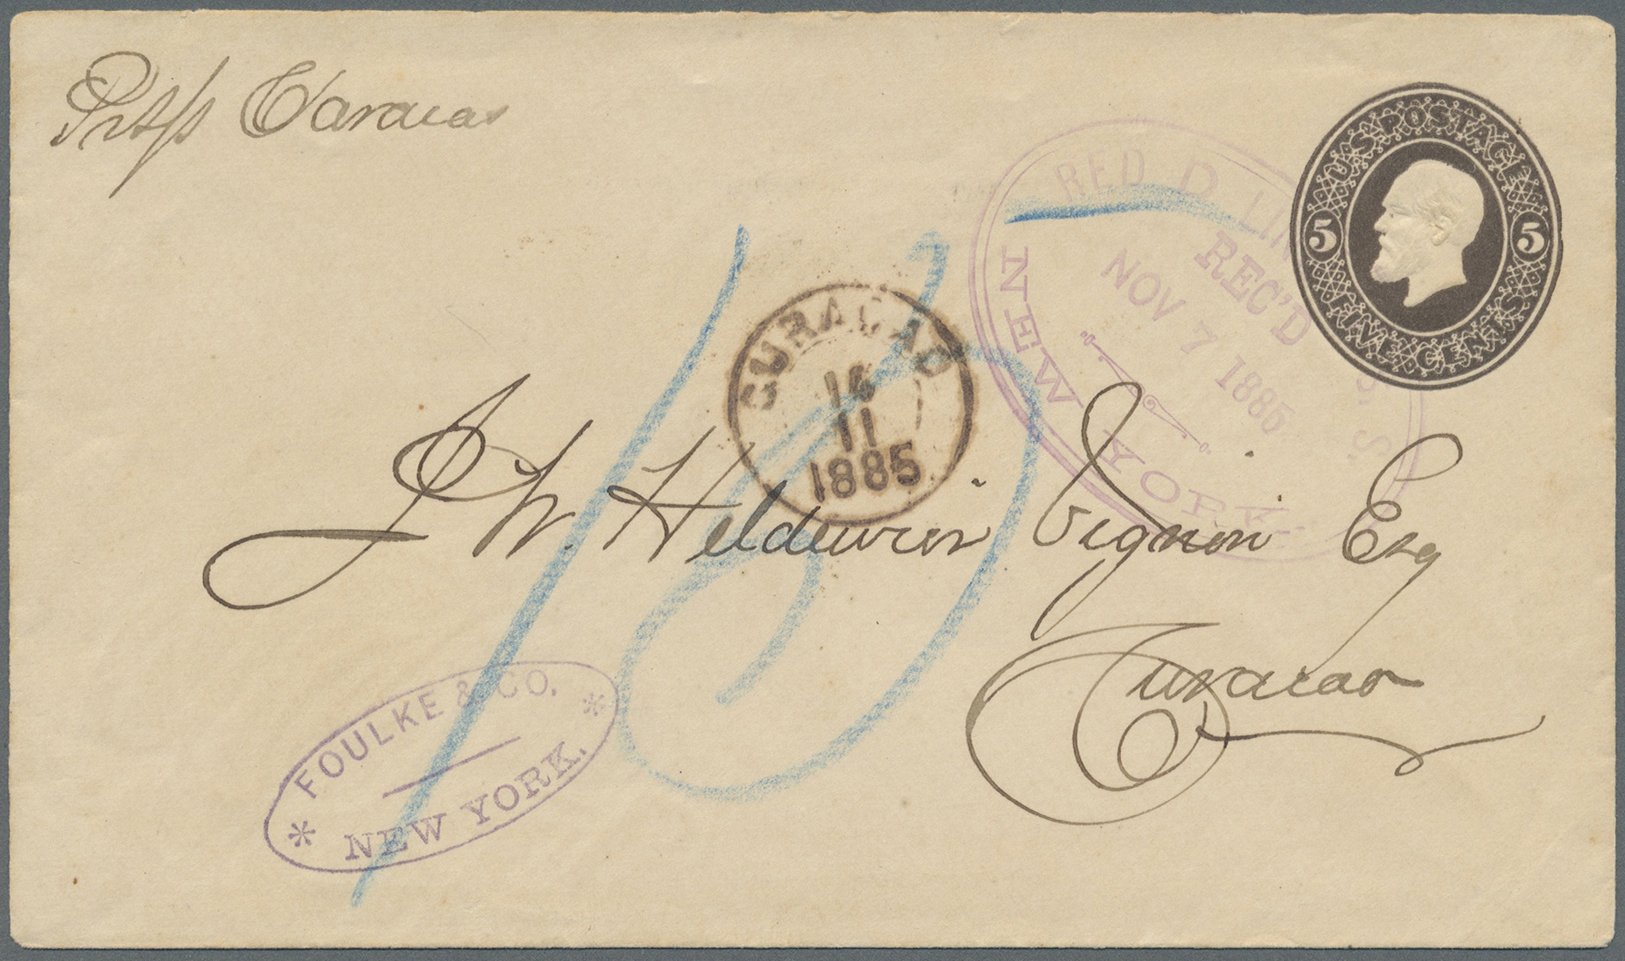 GA Curacao: 1885. United States Postal Stationery Envelope 5c Brown Canceled By Oval 'Red D Line Of S.S. New York' In Vi - Curacao, Netherlands Antilles, Aruba